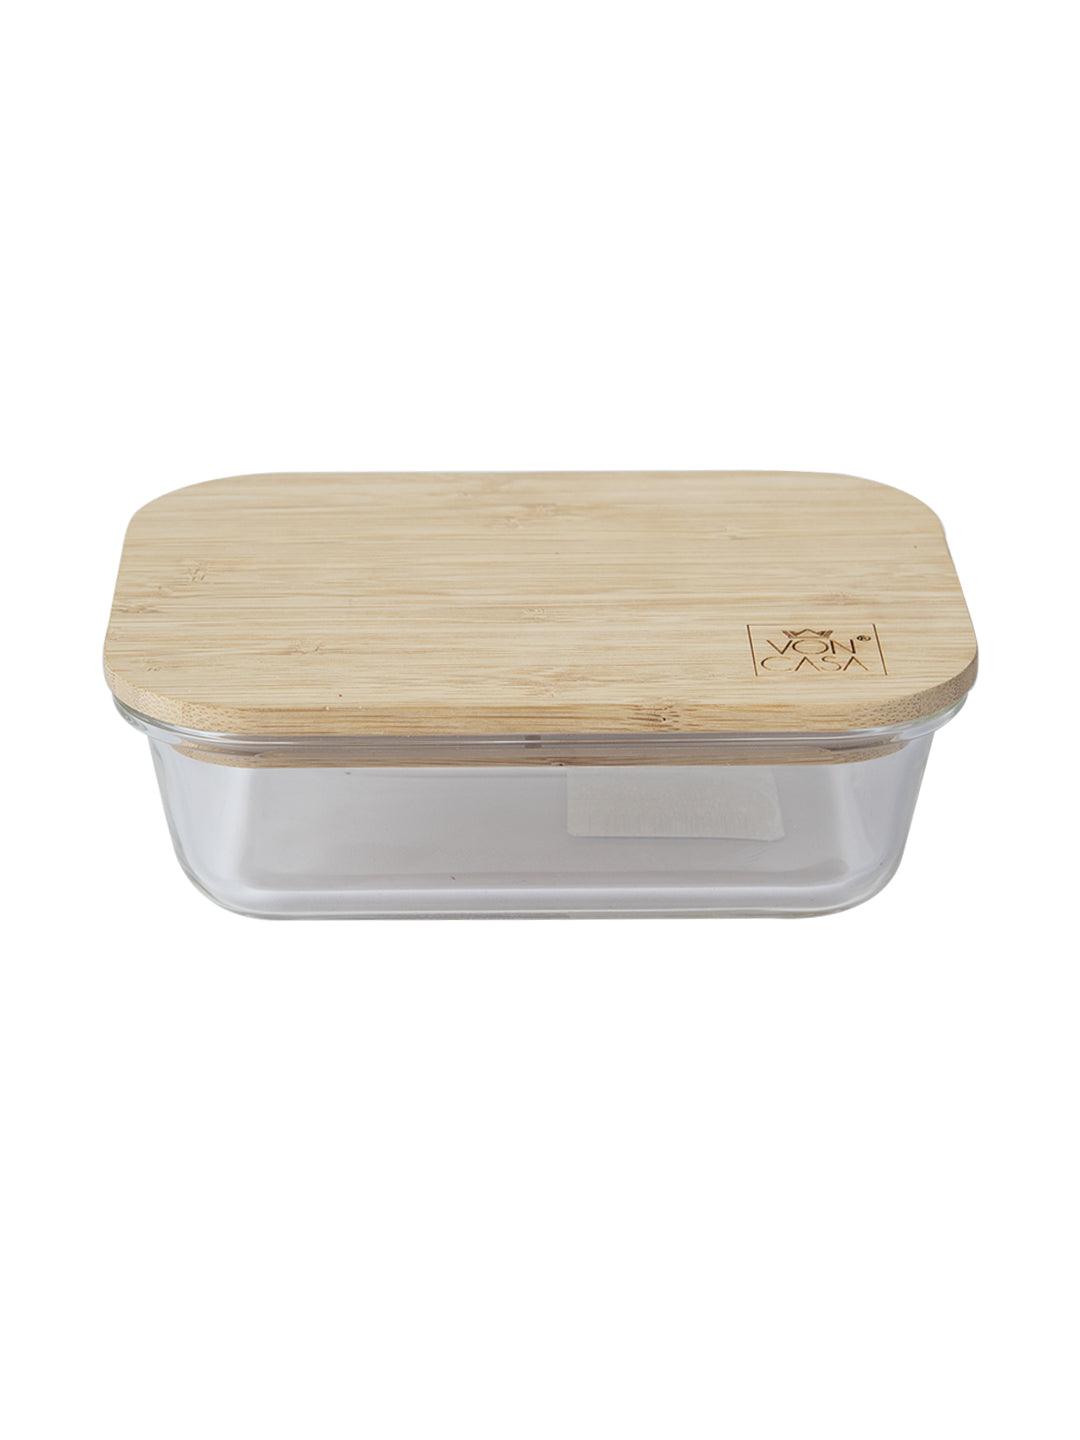 Market99 Borosillicate Glass Food Storage Container With Bamboo Lid - 640mL - MARKET 99